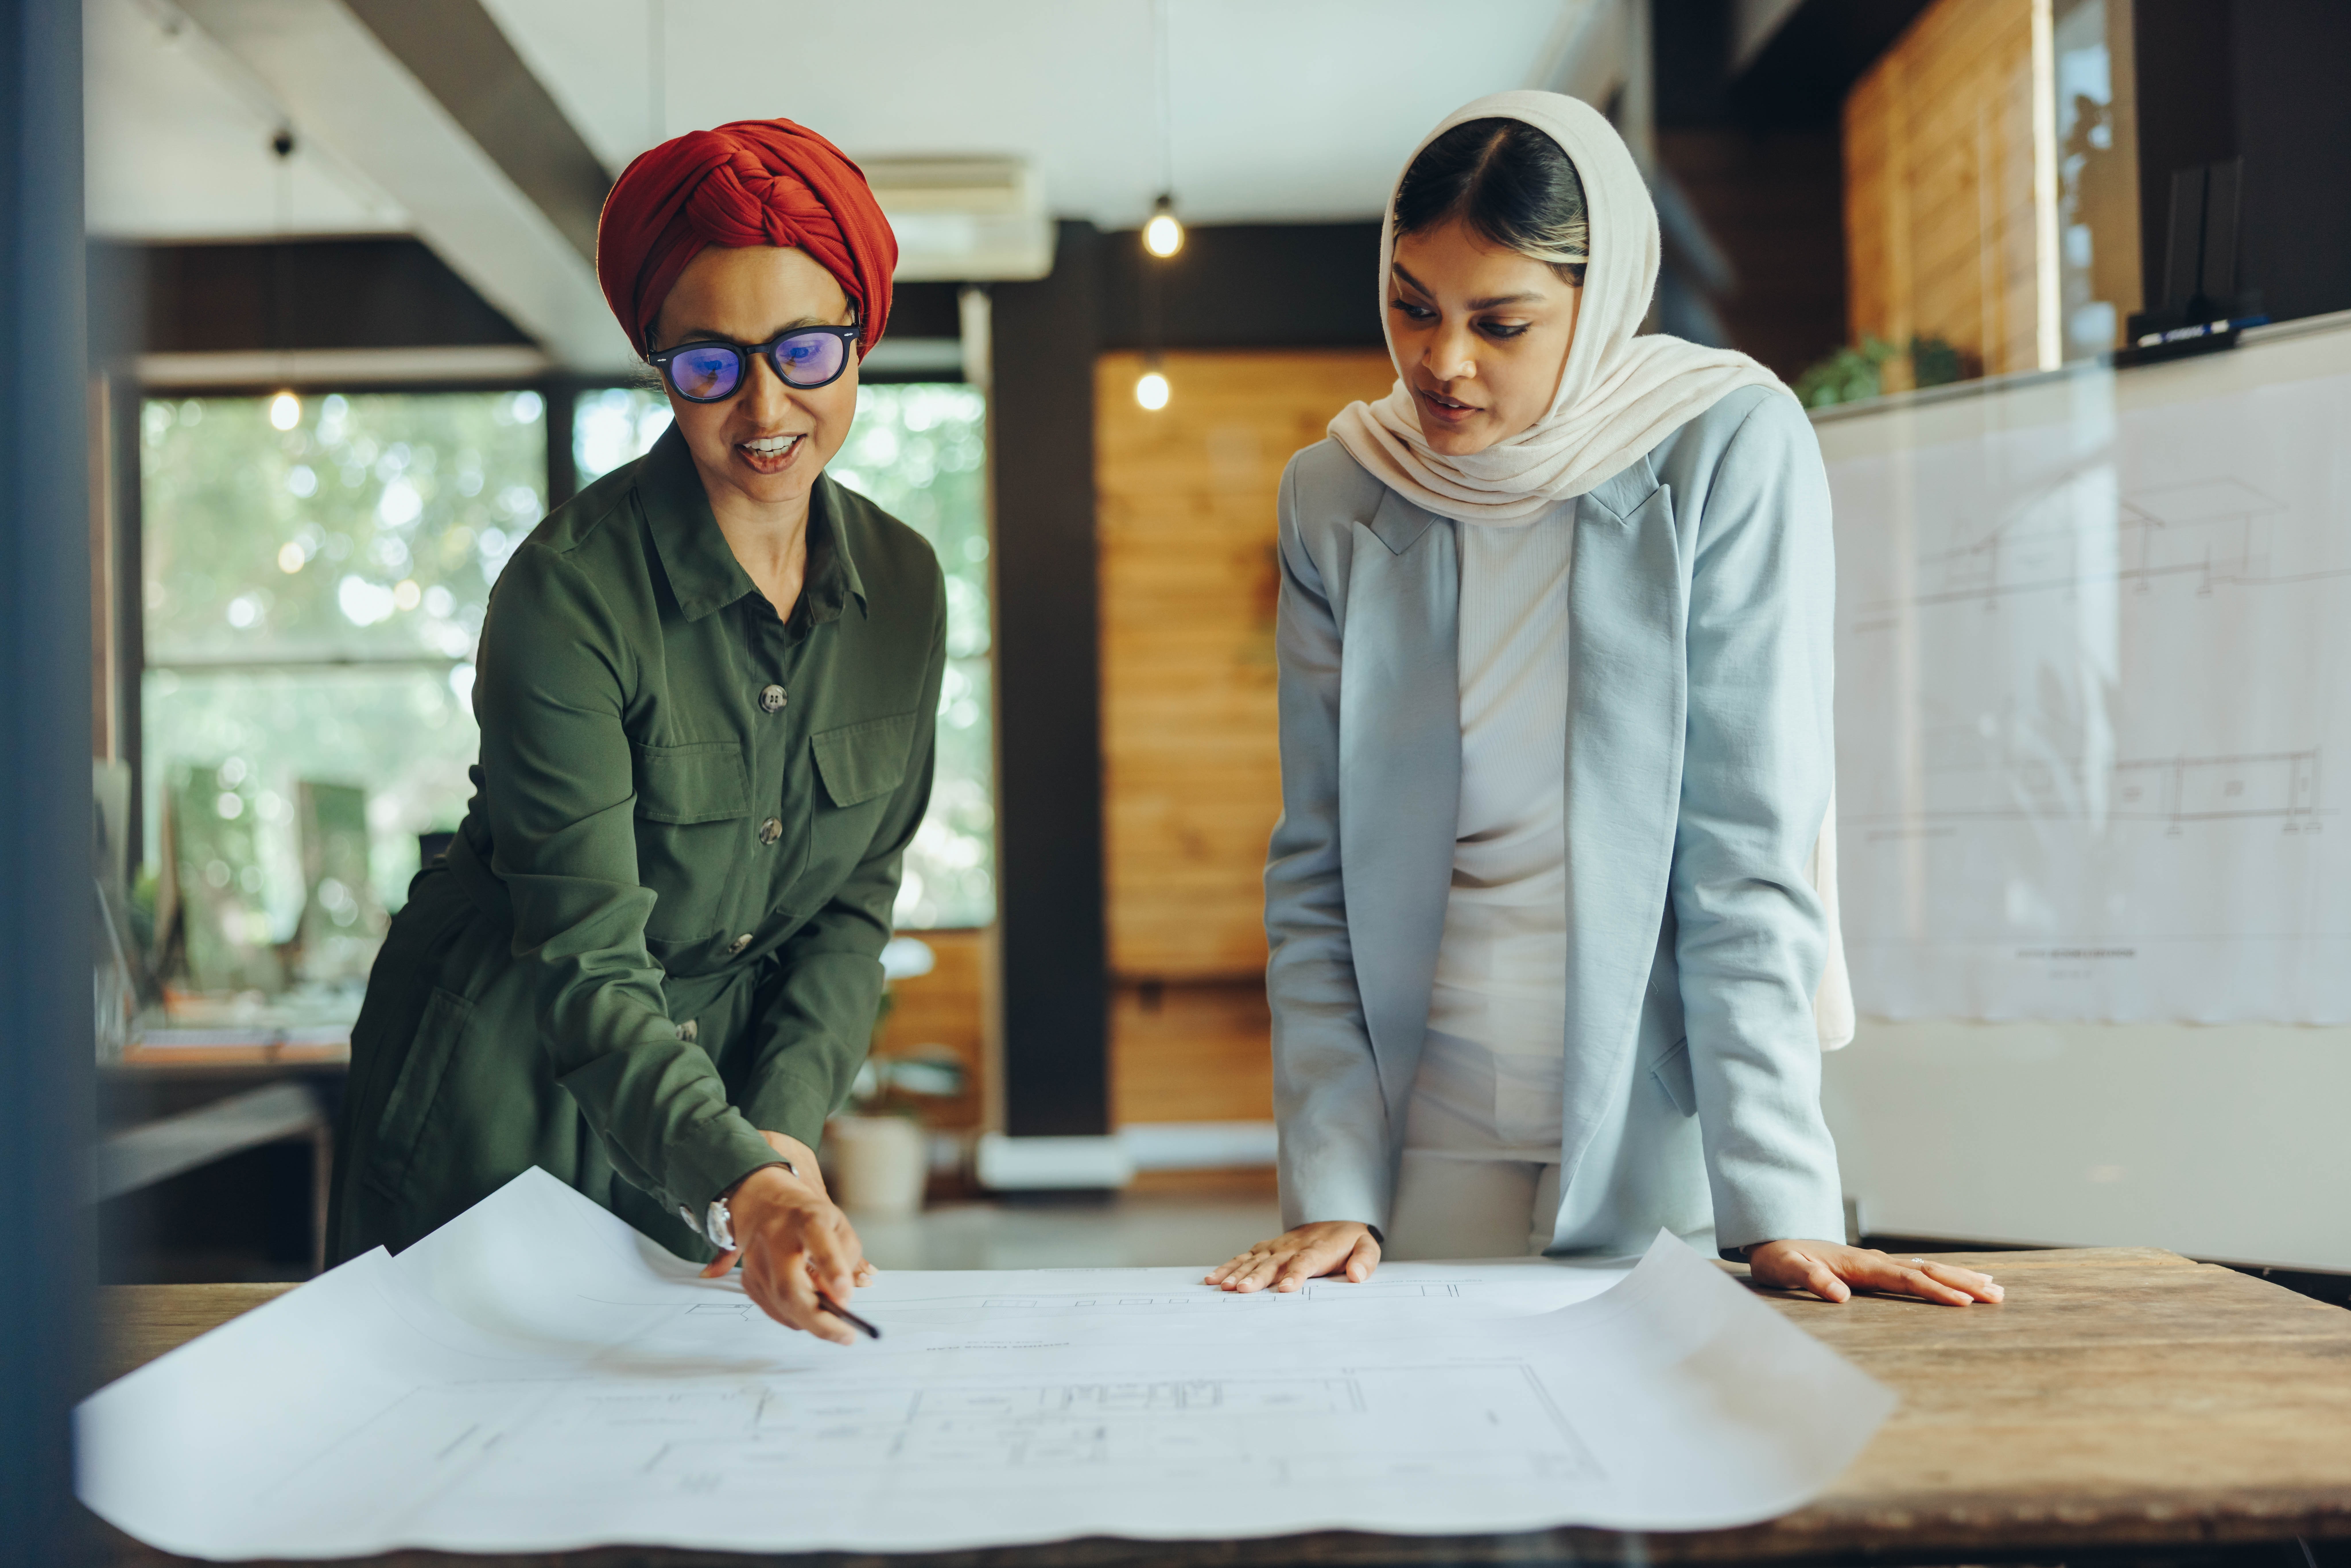 Two women wearing cultural head pieces standing over a desk. They have a large poster in front of them and are discussing the plans on the poster.